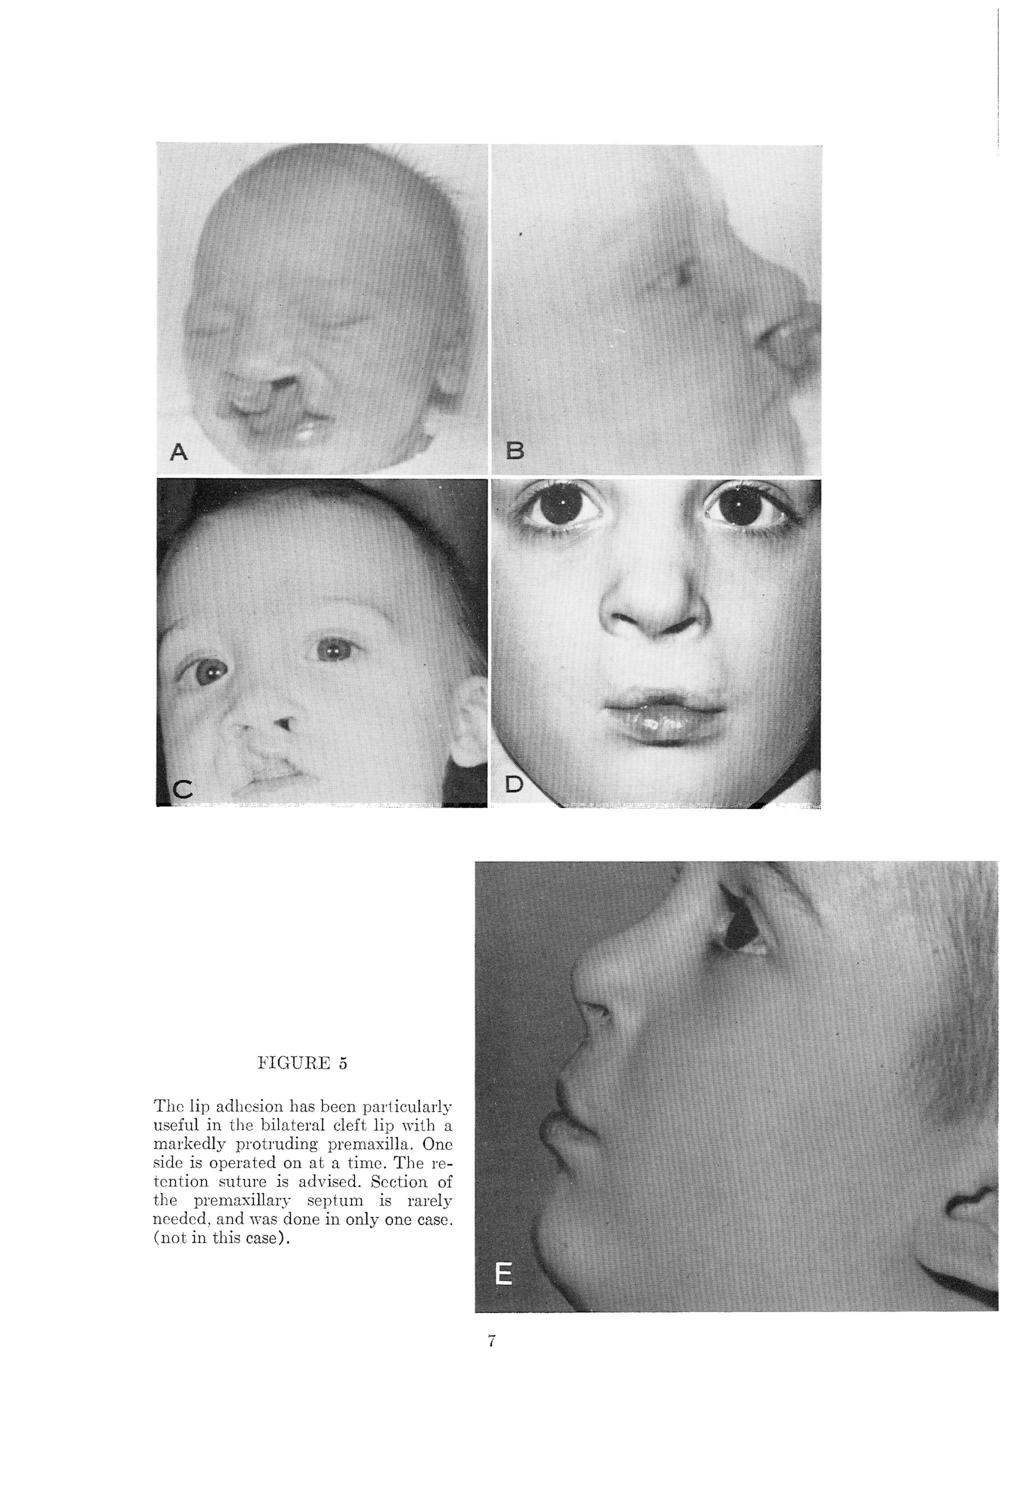 FIGURE 5 The lip adhesion has been particularly useful in the bilateral cleft lip with a markedly protruding premaxilla.